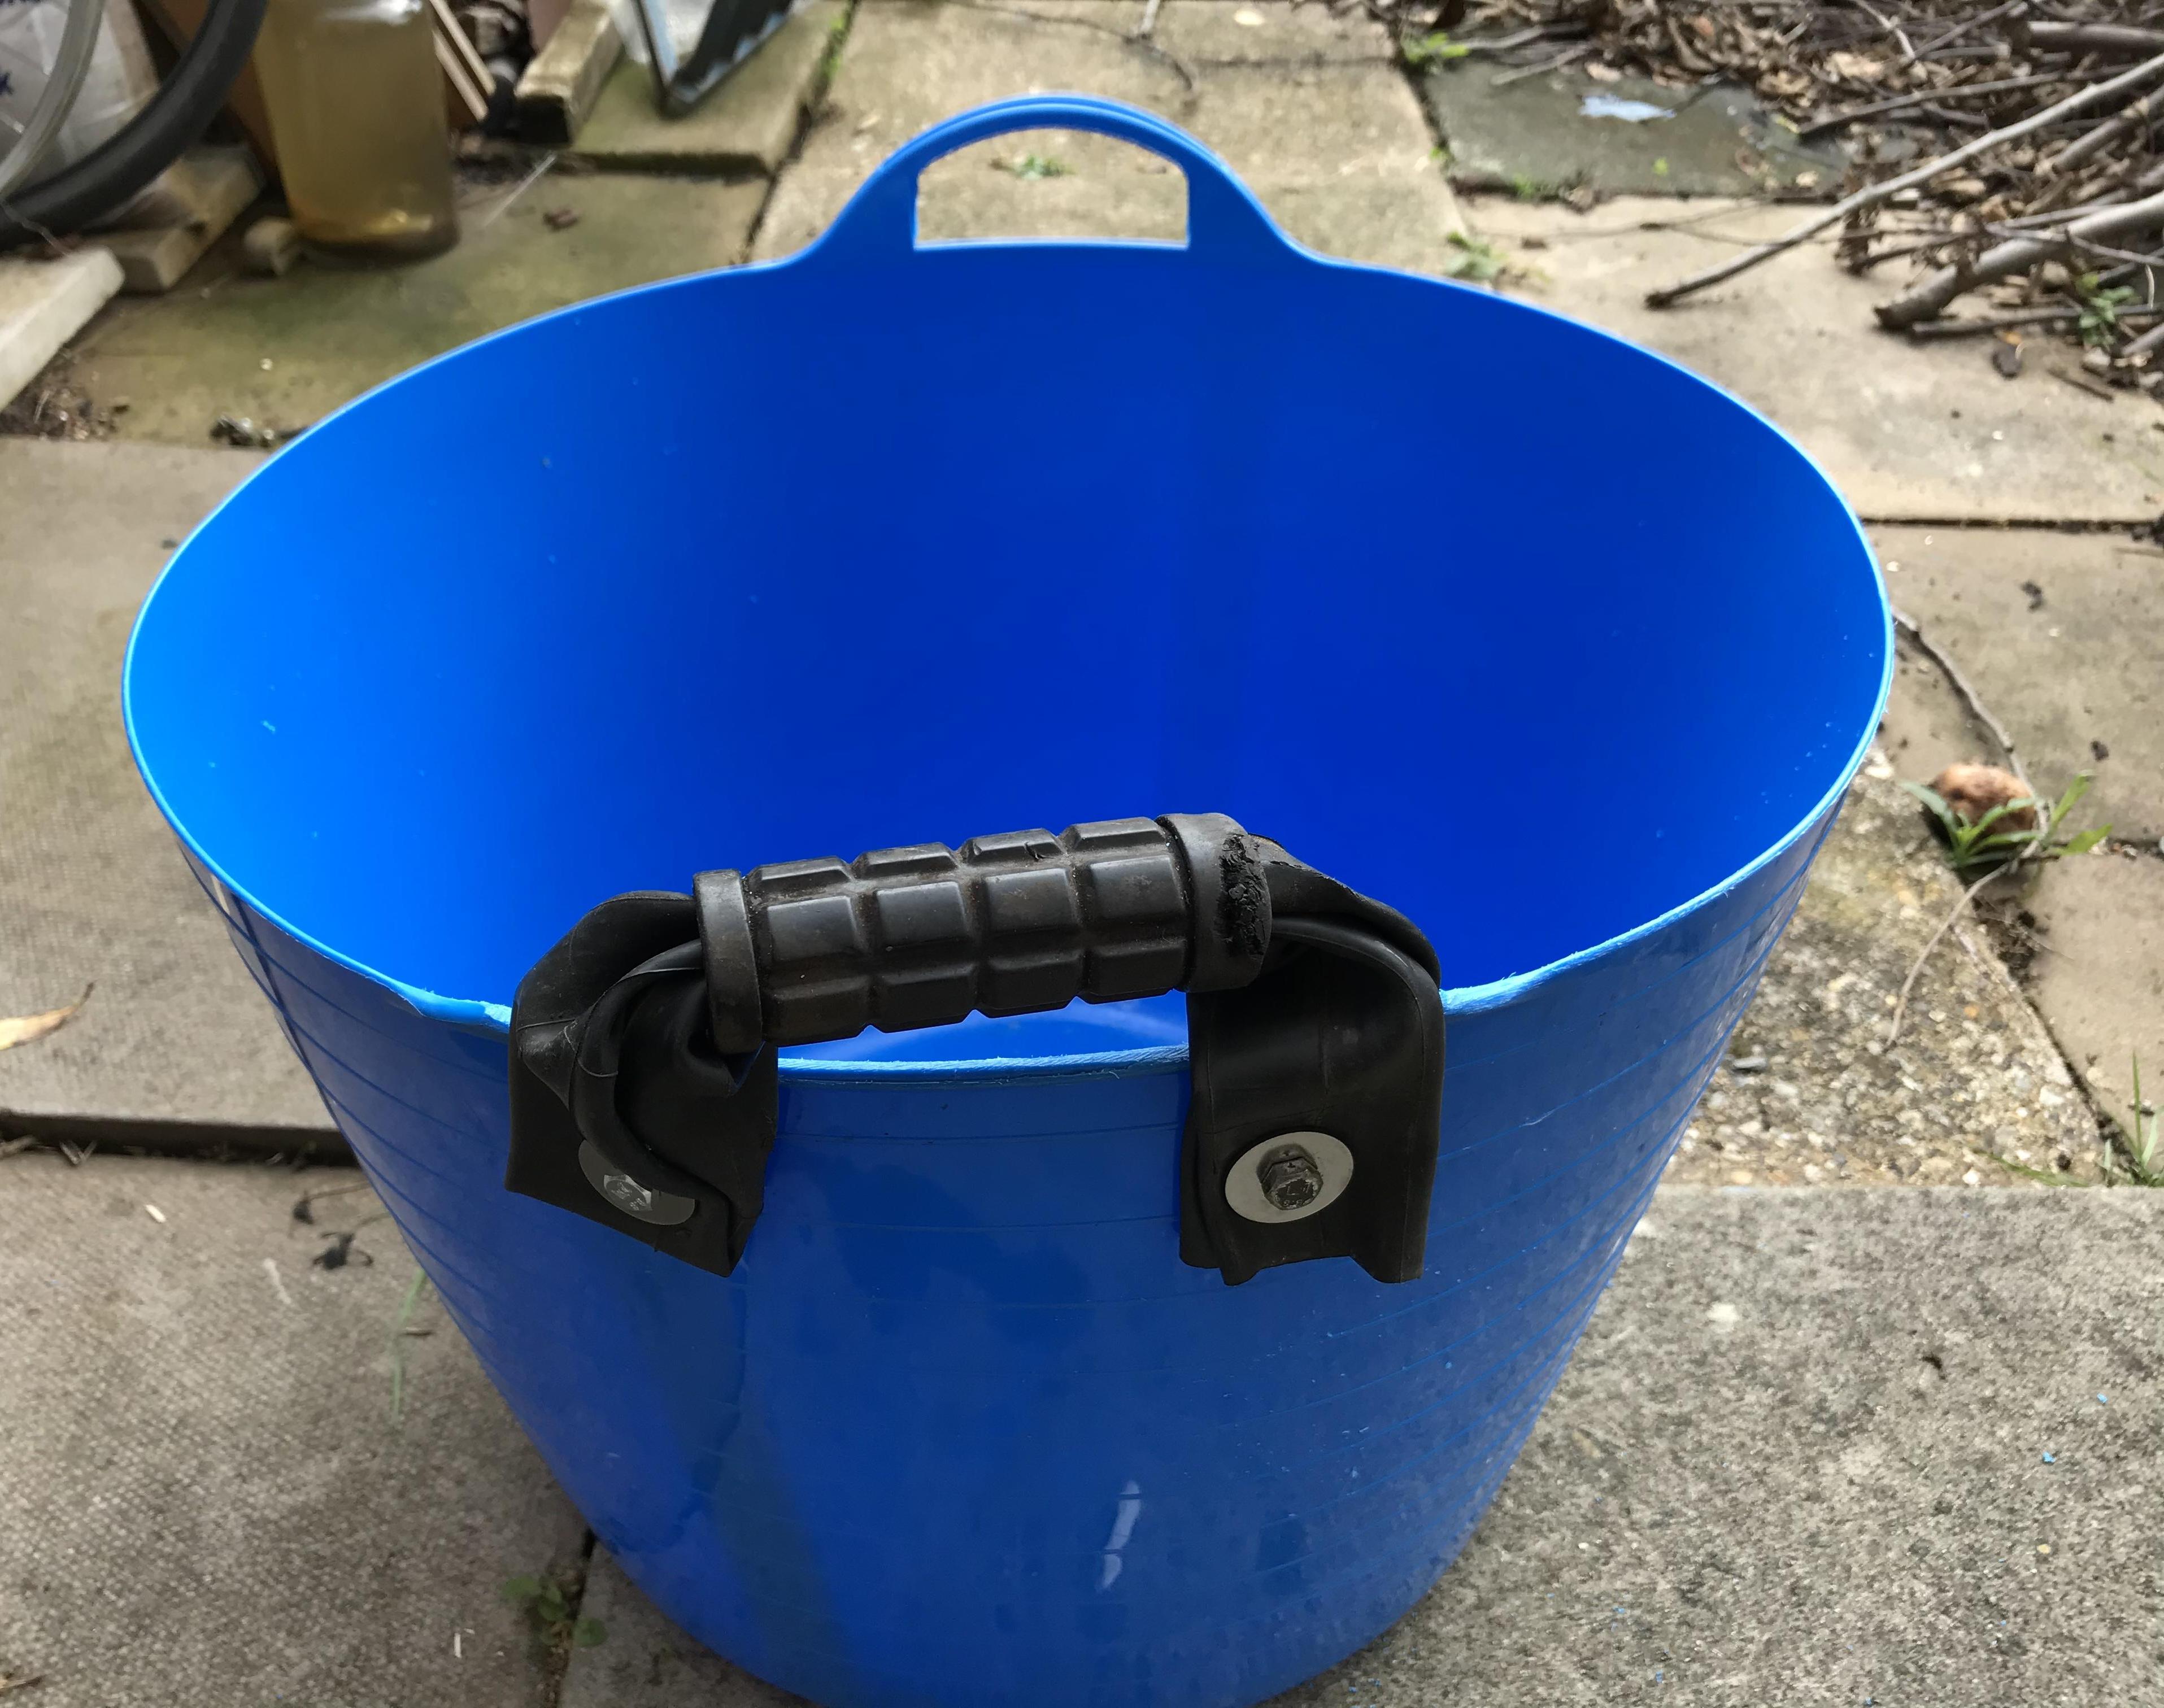 How to Repair a Trug.